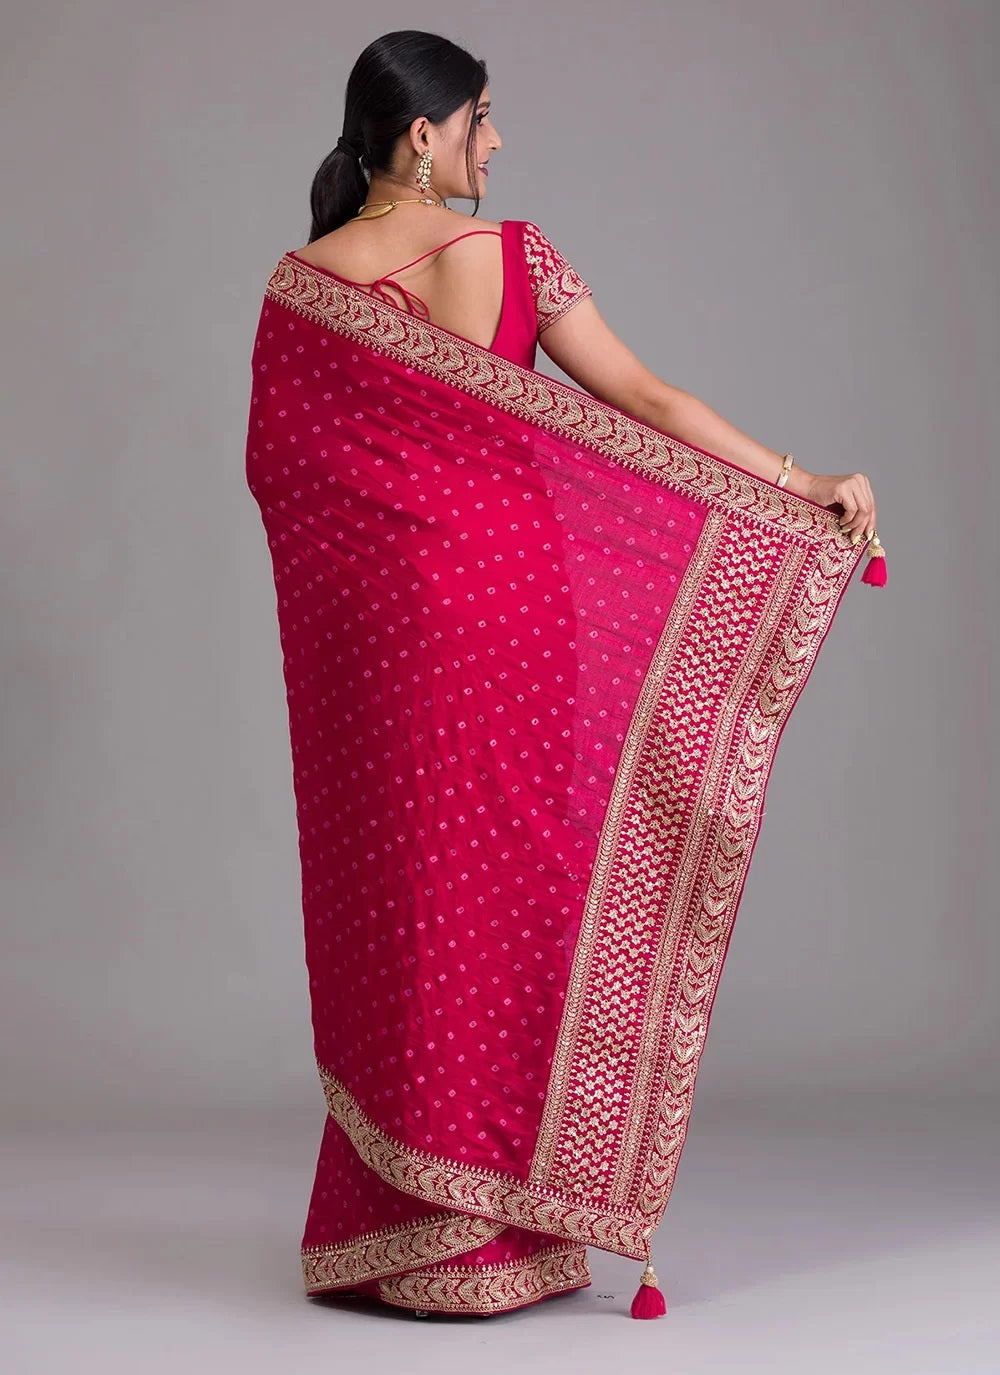 Pink Bandhani Print Georgette Indian Saree with Embroidered Border